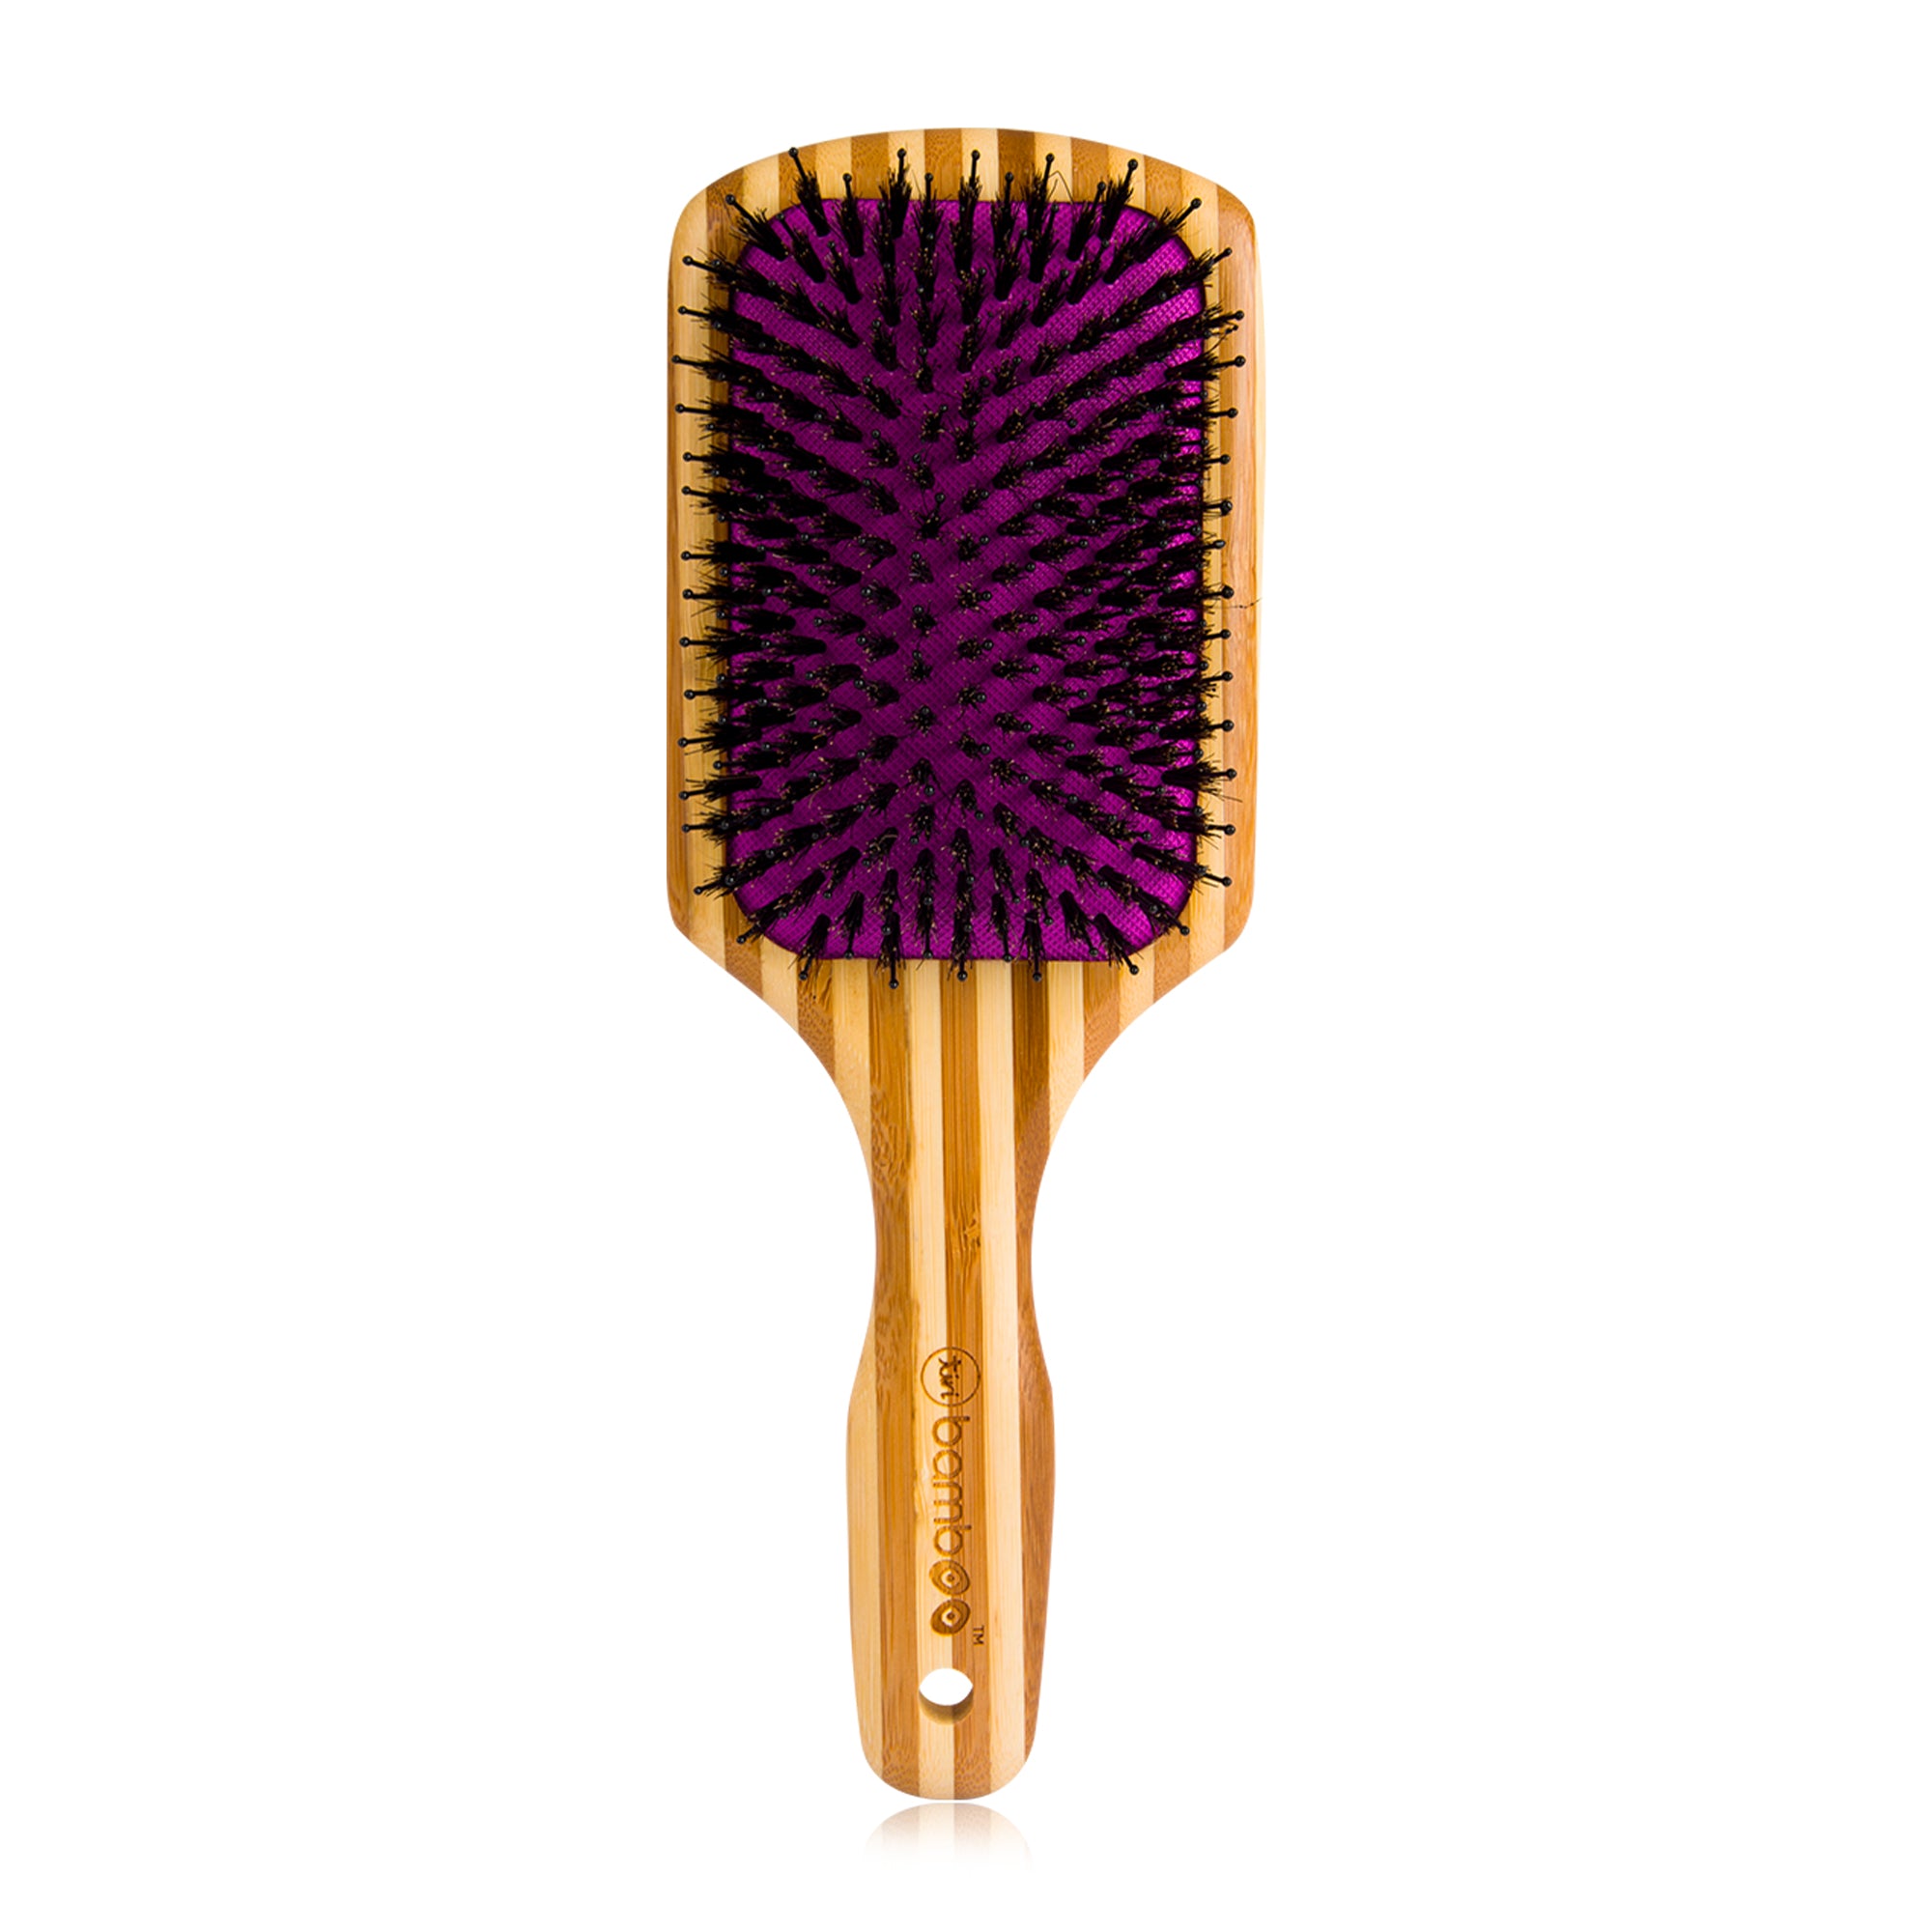 Bamboo XL Detangling Paddle Brush with Boar Bristles